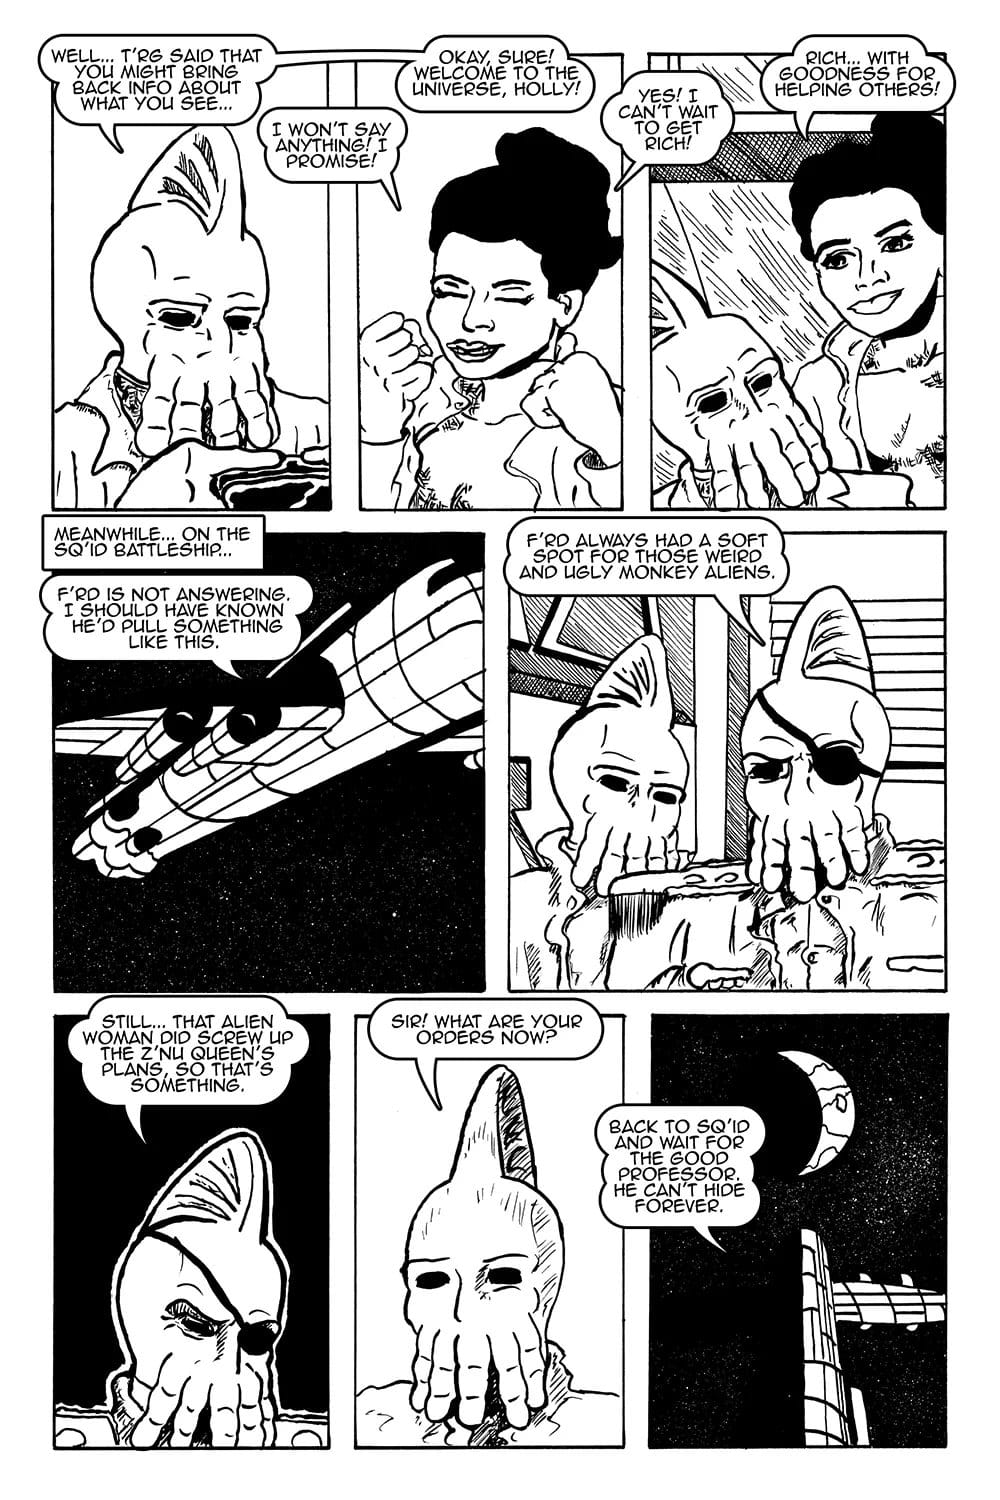 Issue 01 page 23